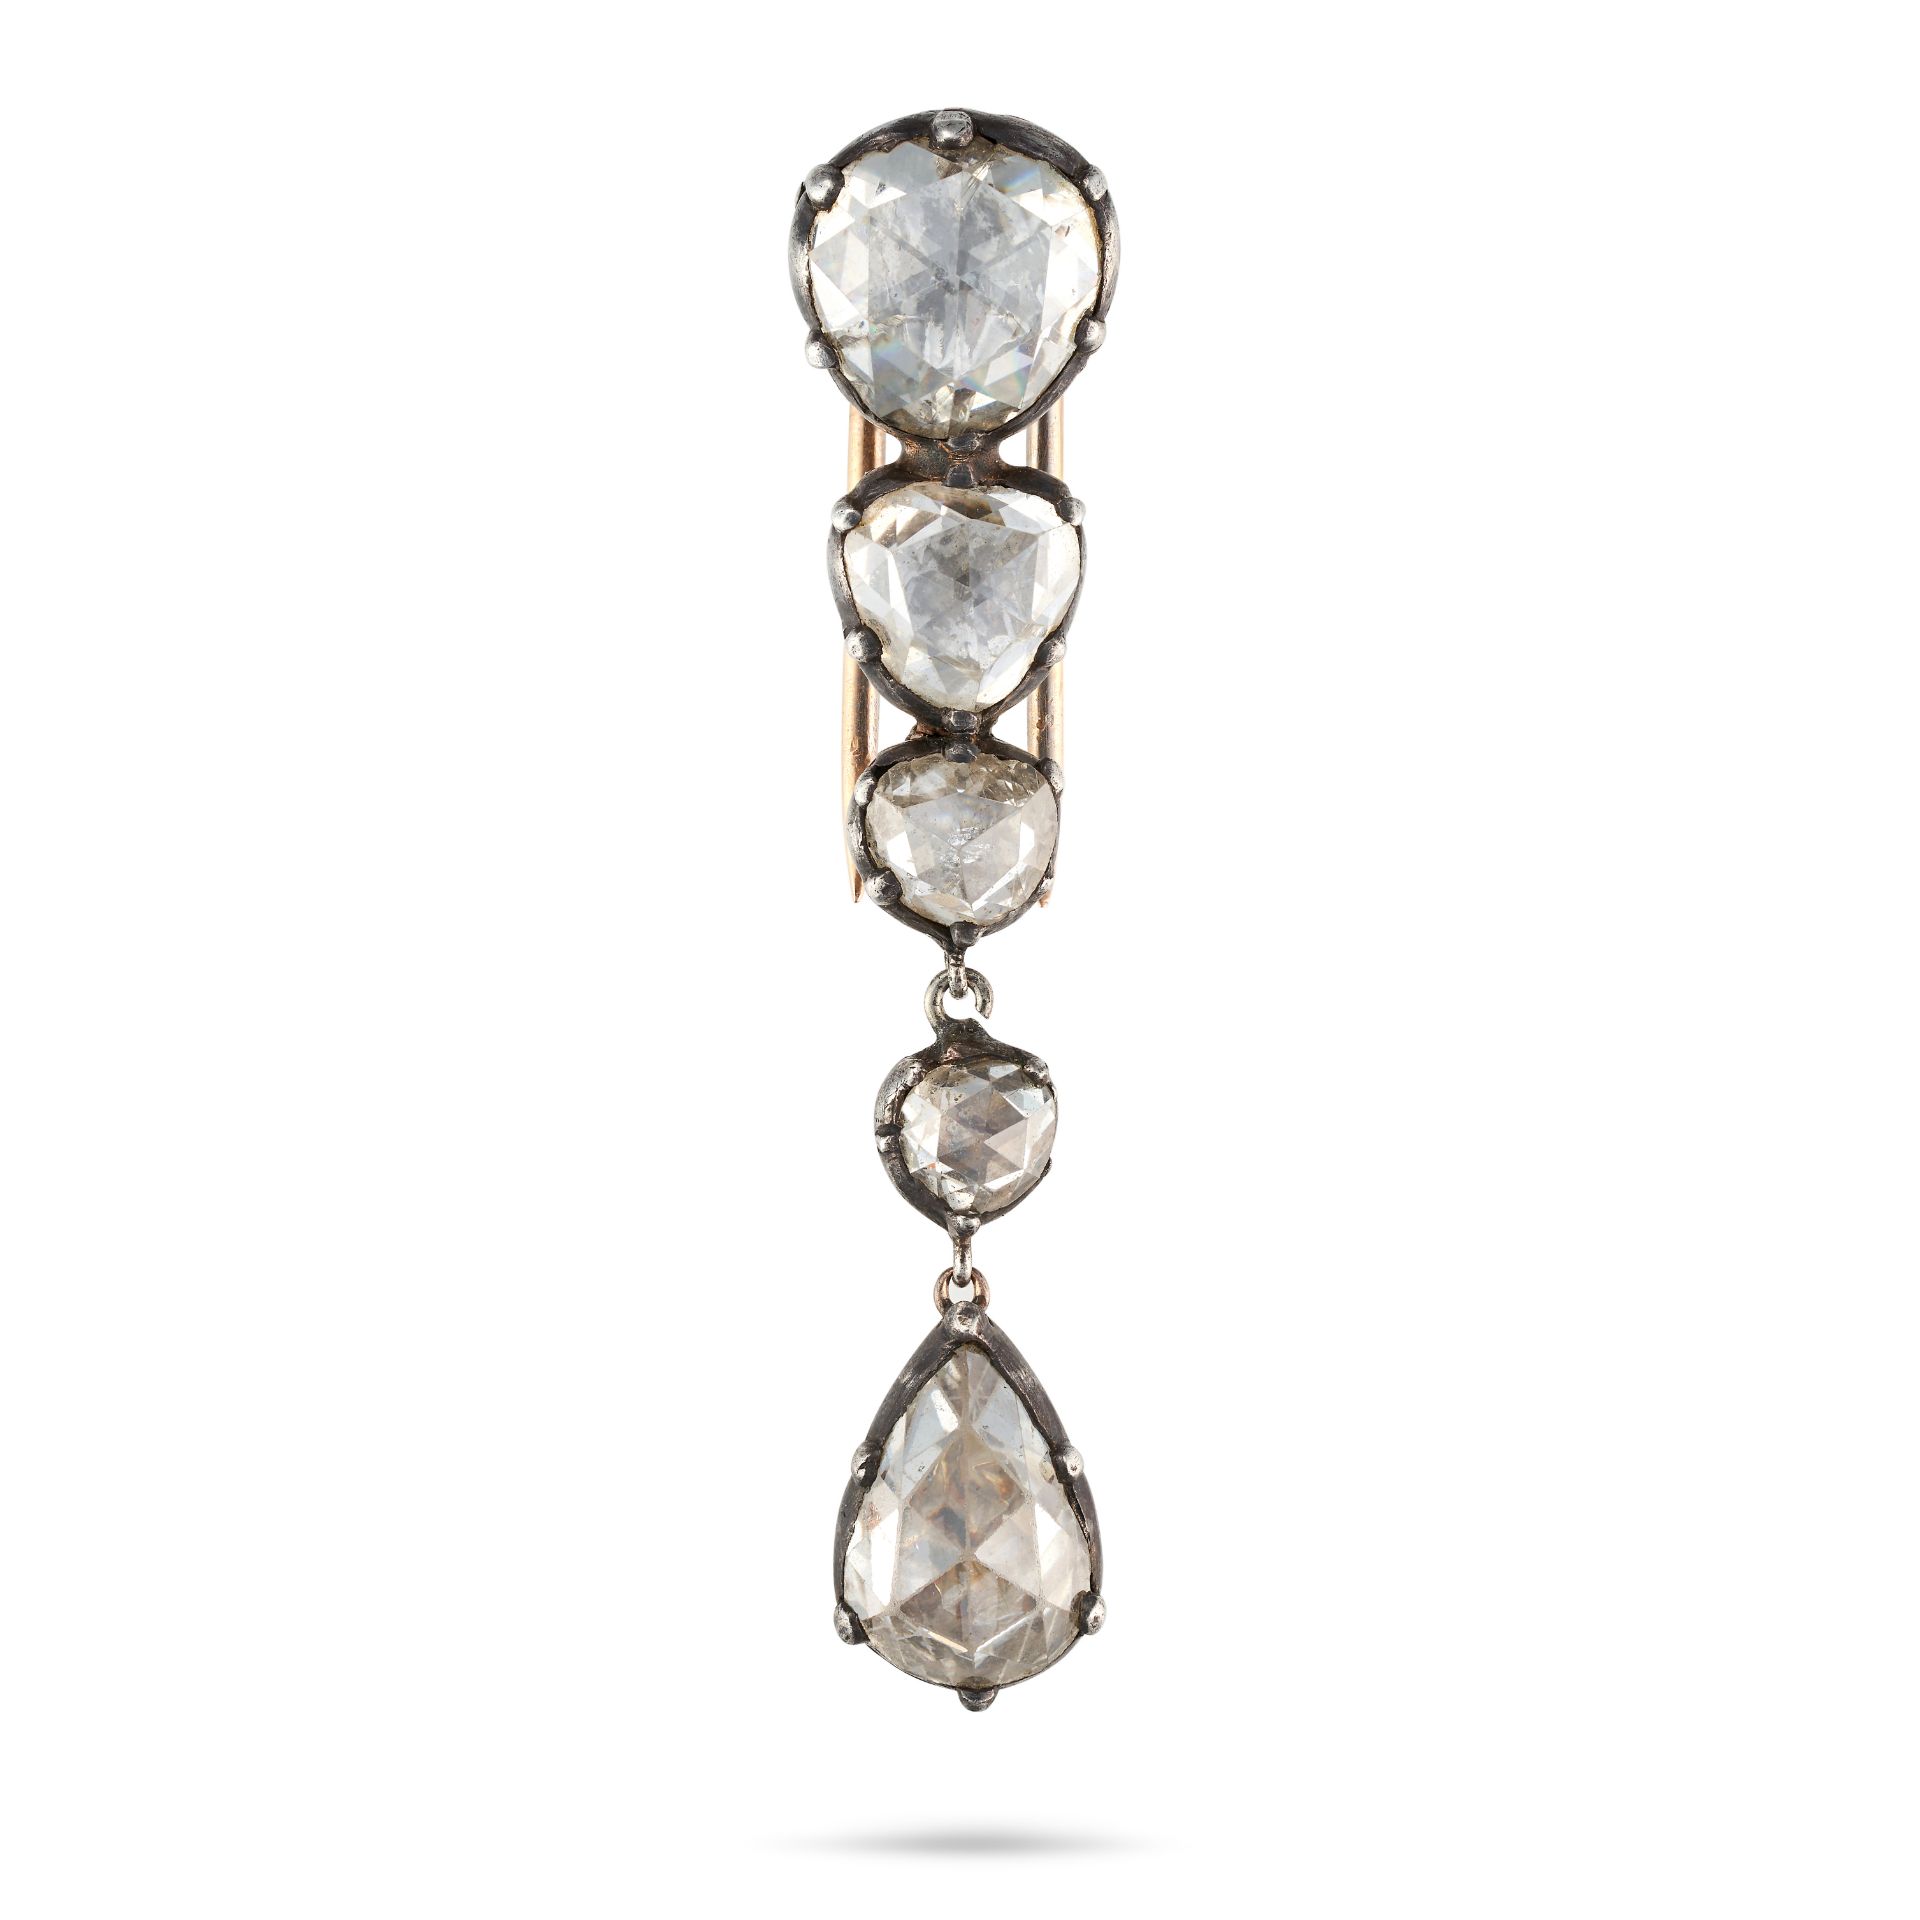 AN ANTIQUE DIAMOND CLIP BROOCH in yellow gold and silver, set with a row of four rose cut diamond...